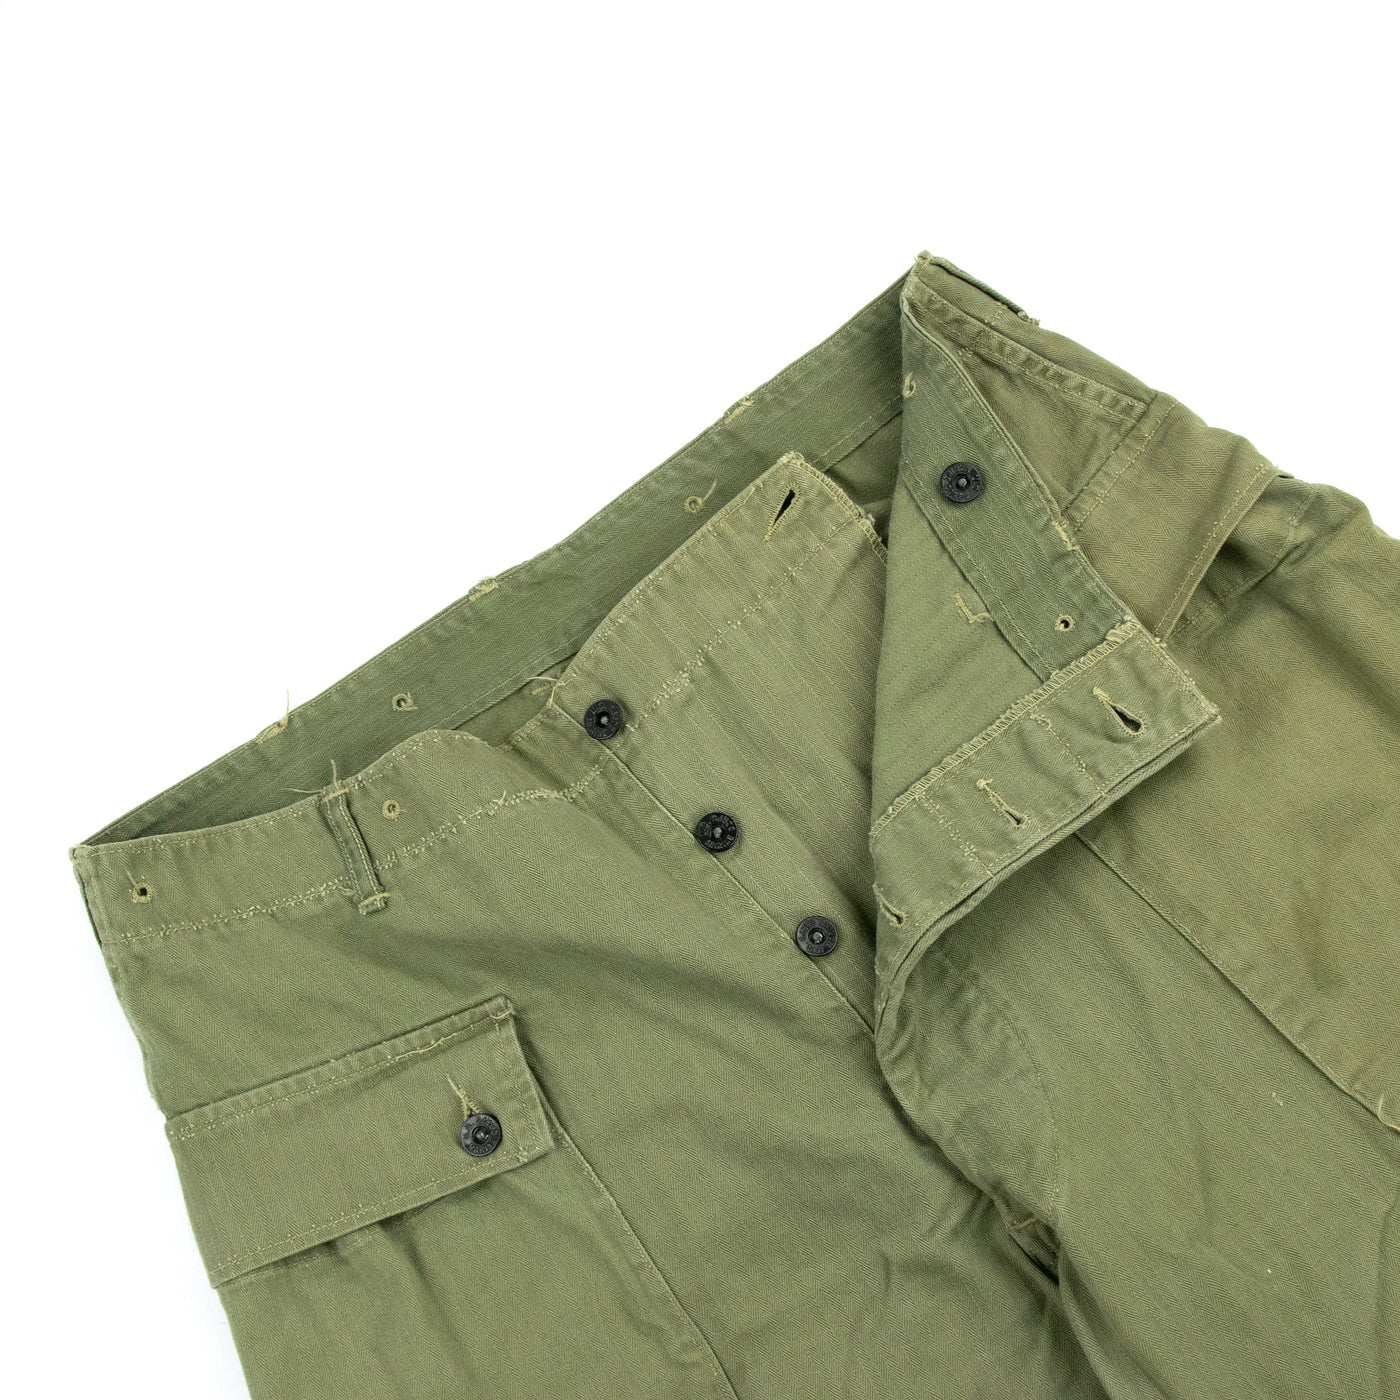 Vintage 1940s US Army USMC P-44 'Monkey Pants' Herringbone Twill Military Combat Trousers - 34 Buttons